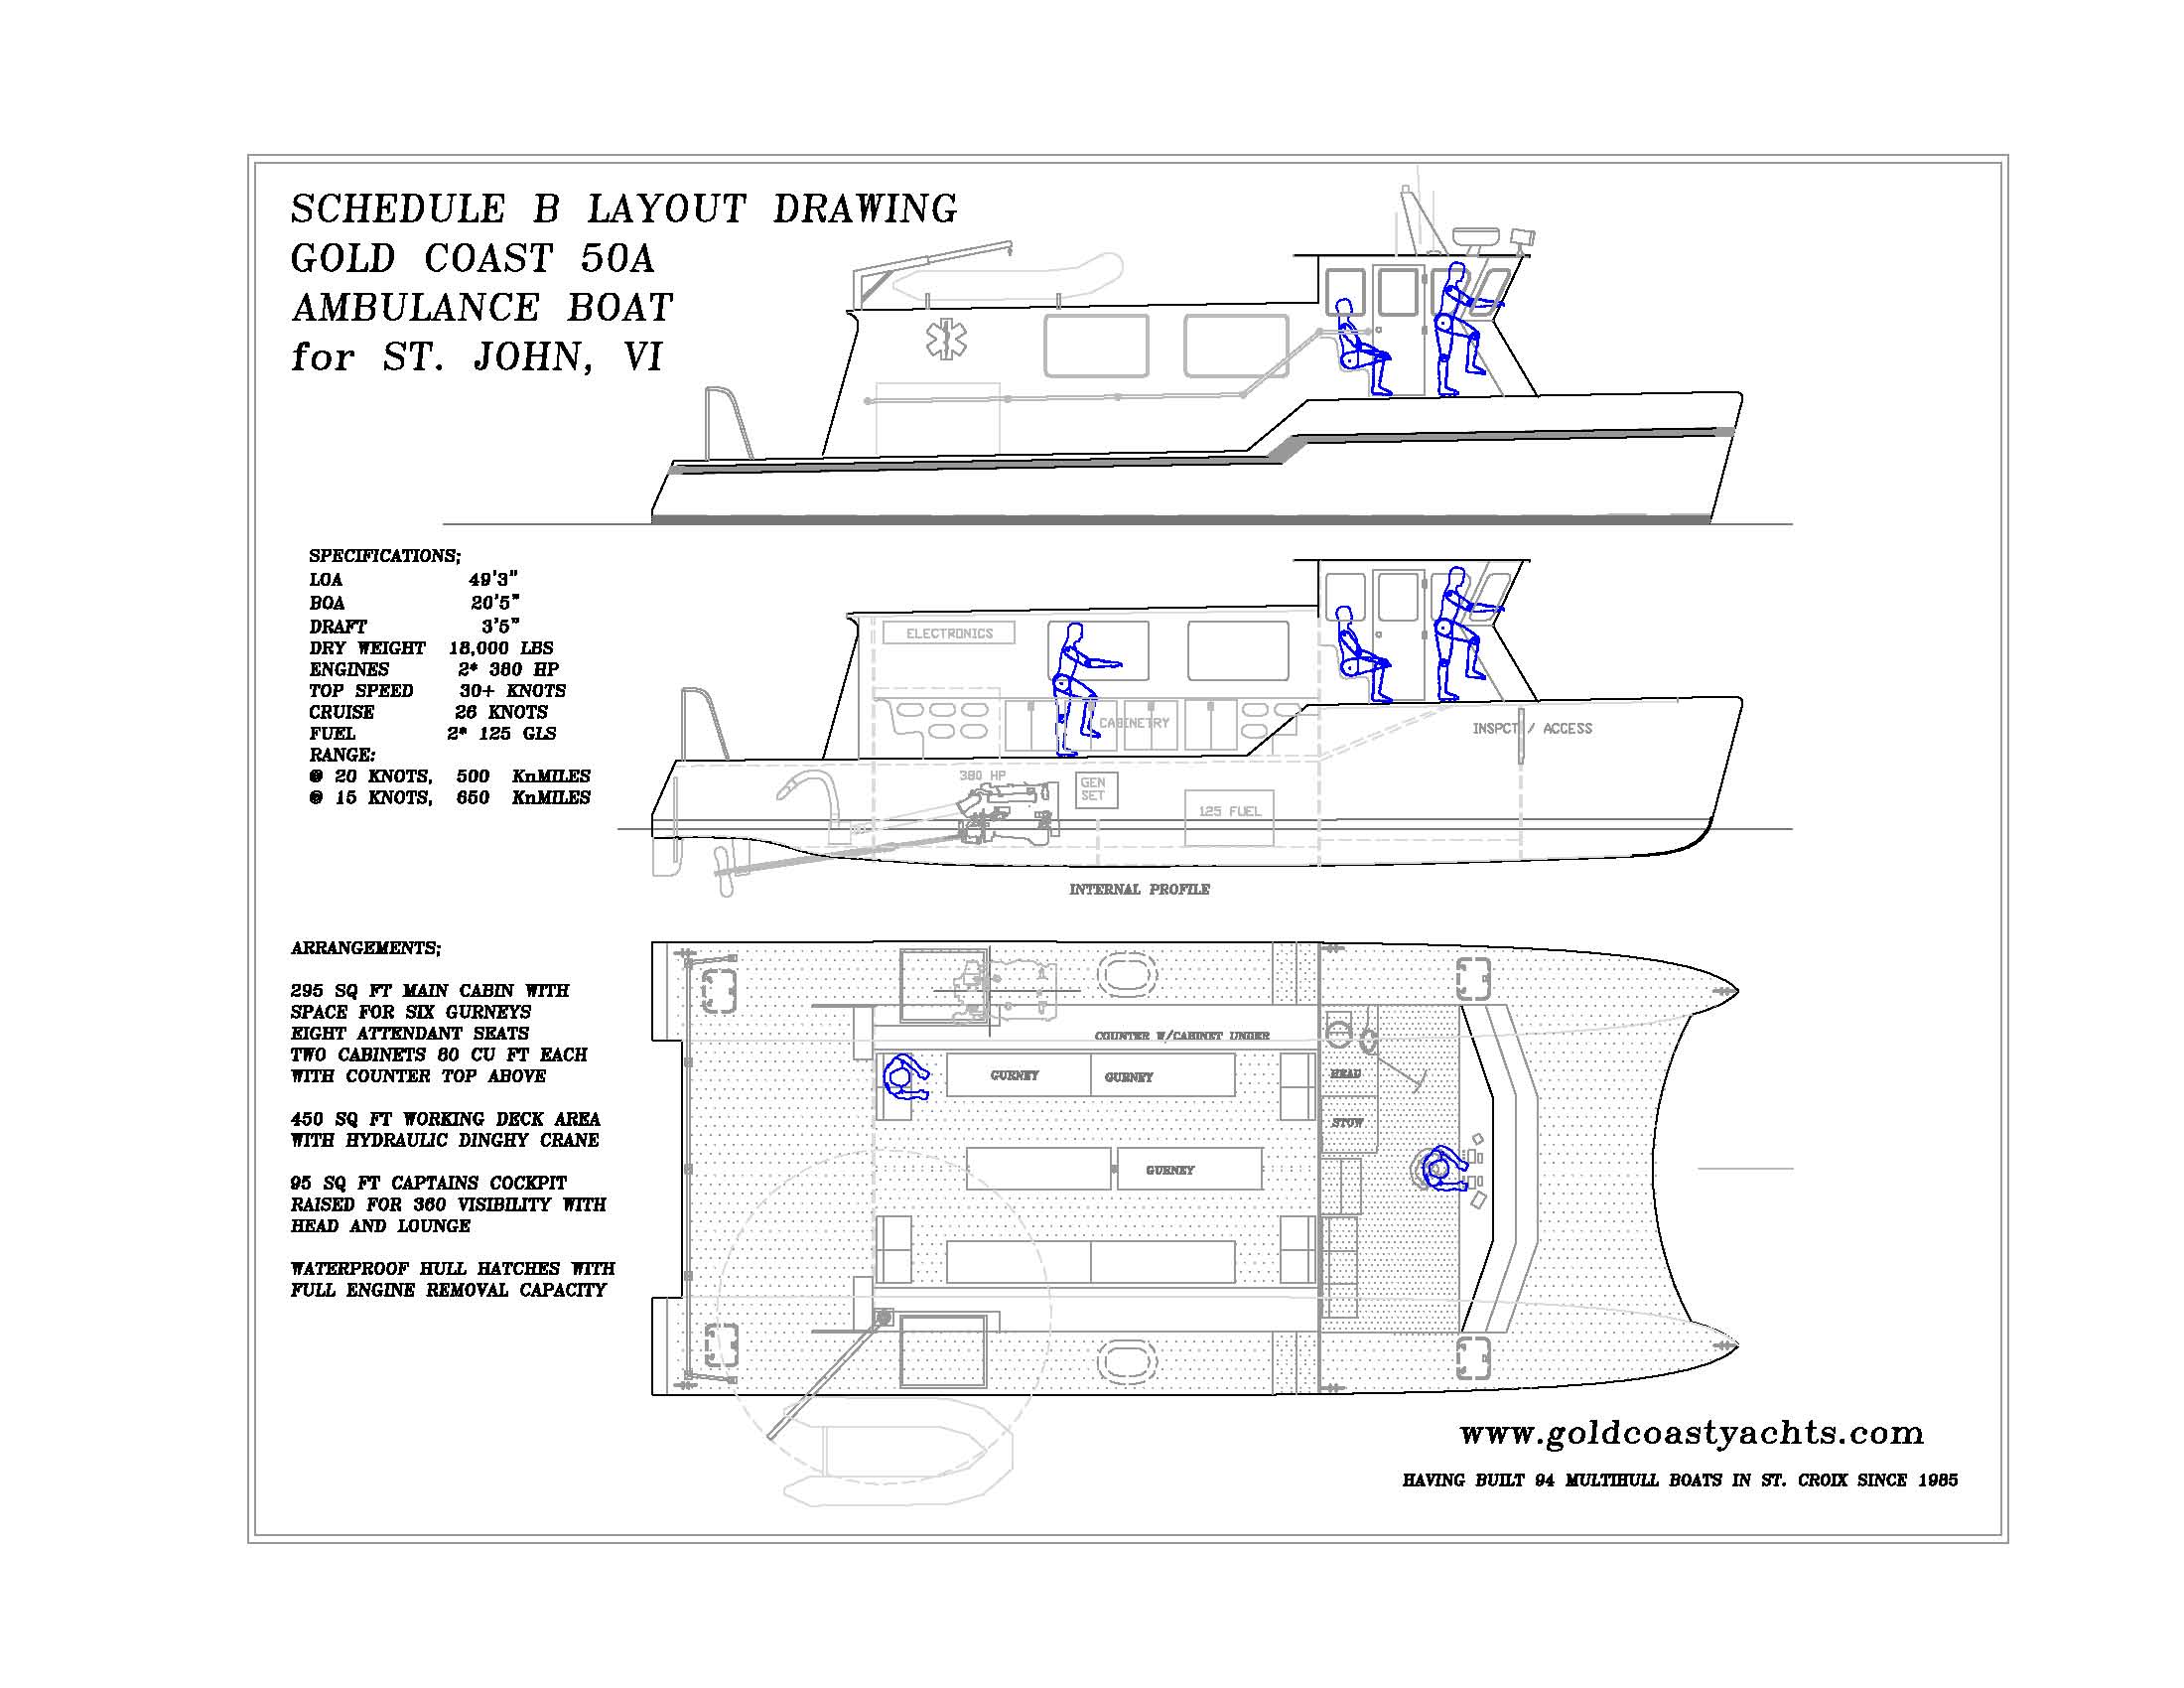 Pictured are the design drawings for the proposed ambulance boat (Illustration courtesy Government House).